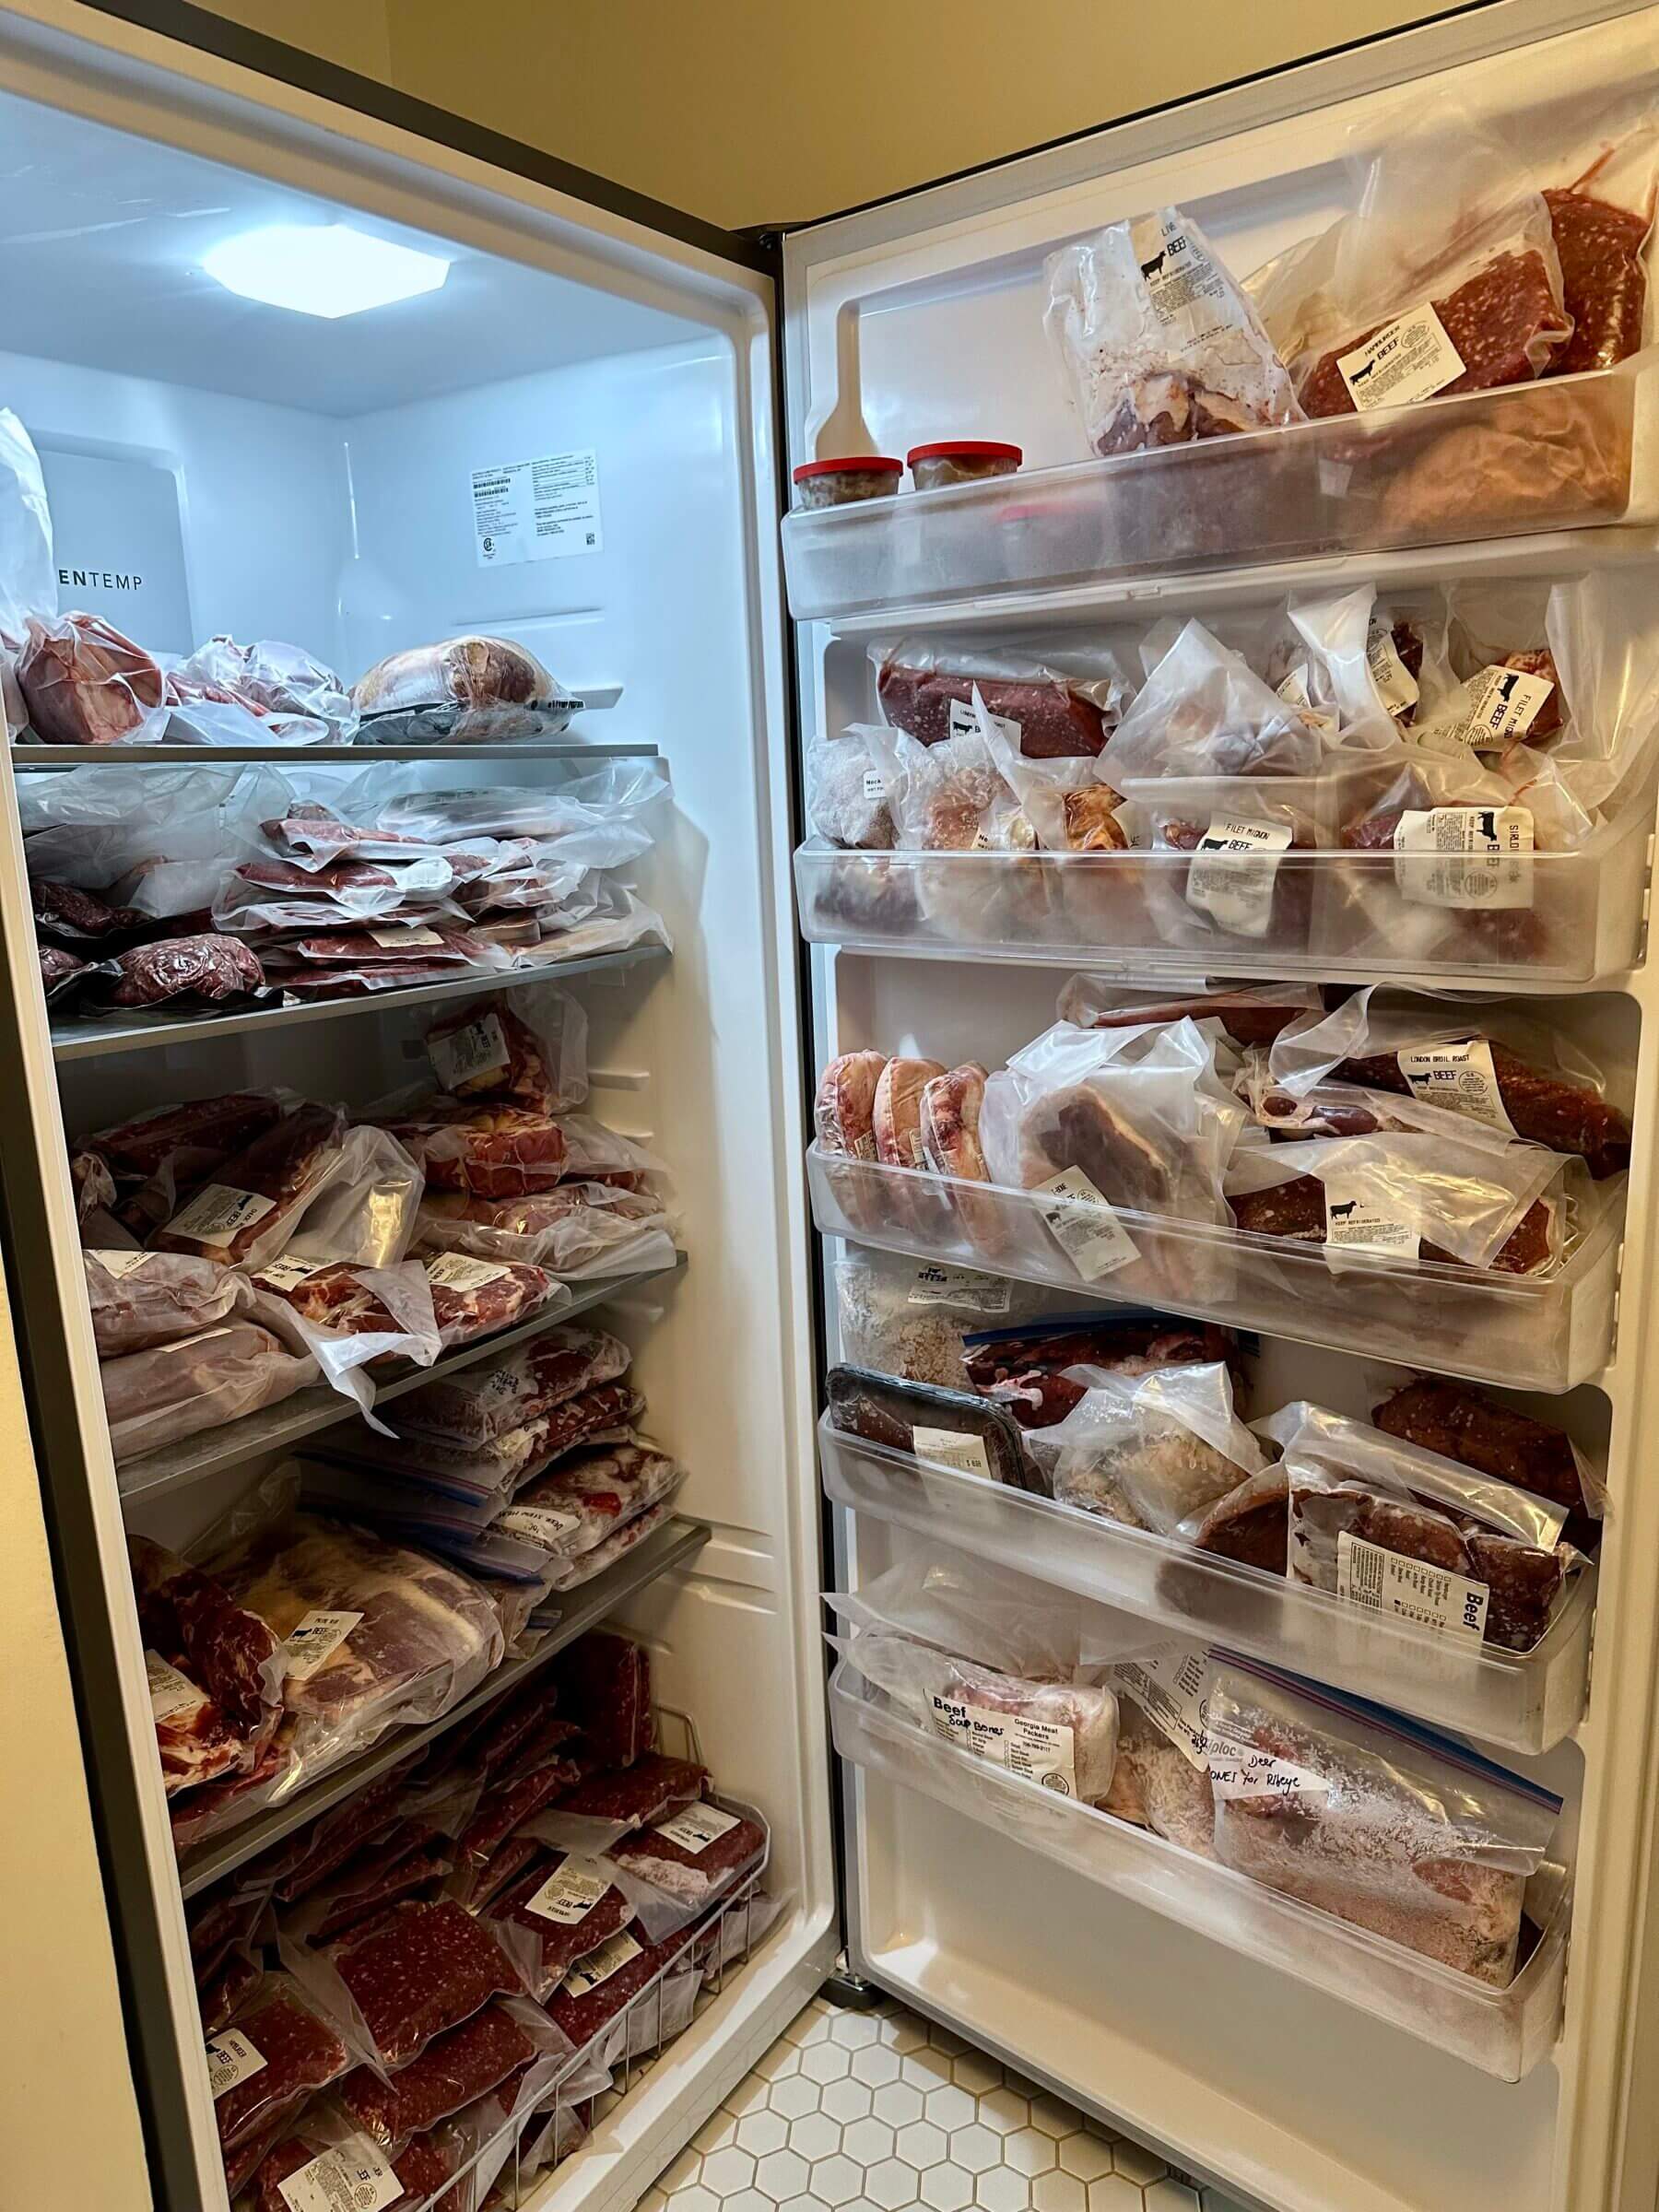 Our freezer is stocked with grass-fed beef, which is a rich source of micronutrients and fatty acids that helps protect our skin.